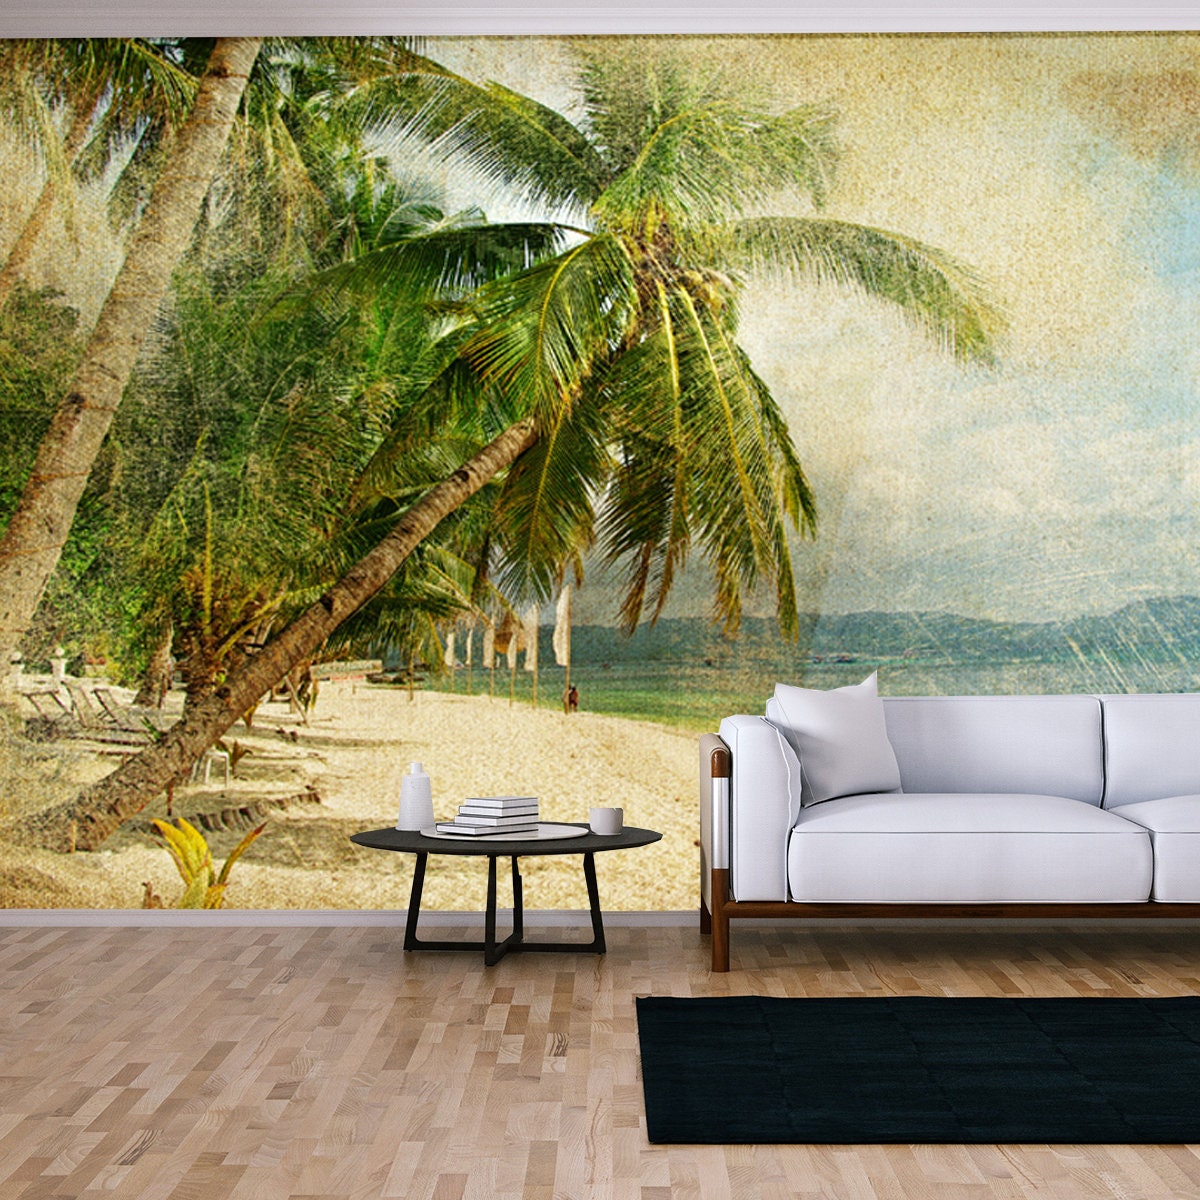 Tropical Beach Retro Styled Picture Wallpaper Living Room Mural